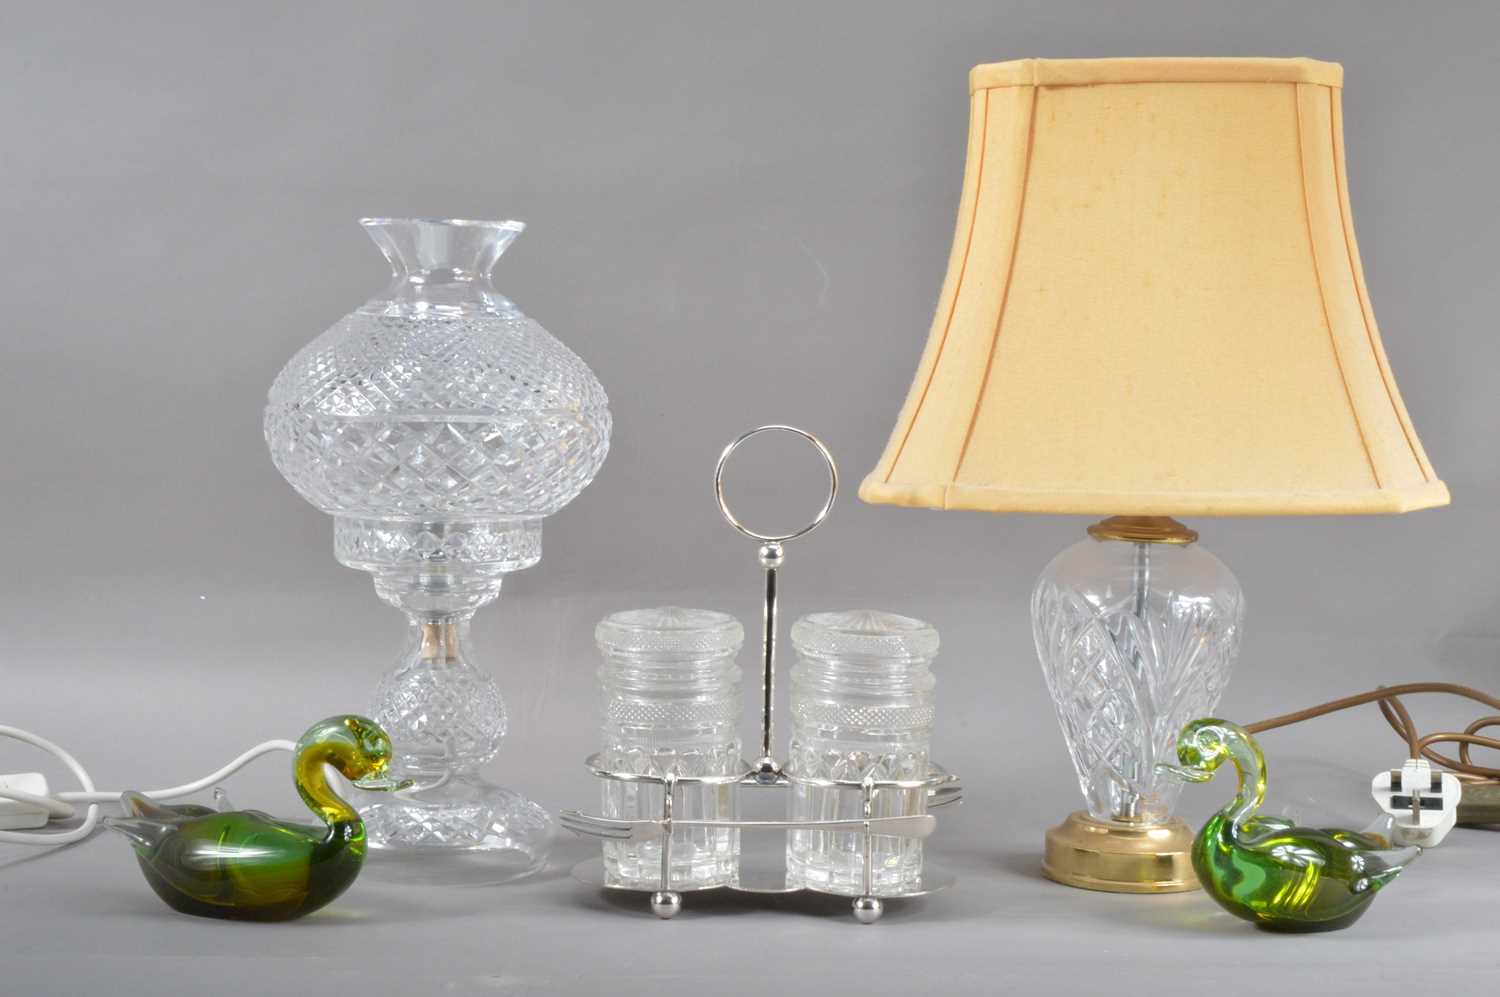 Lot 58 - A collection of glassware